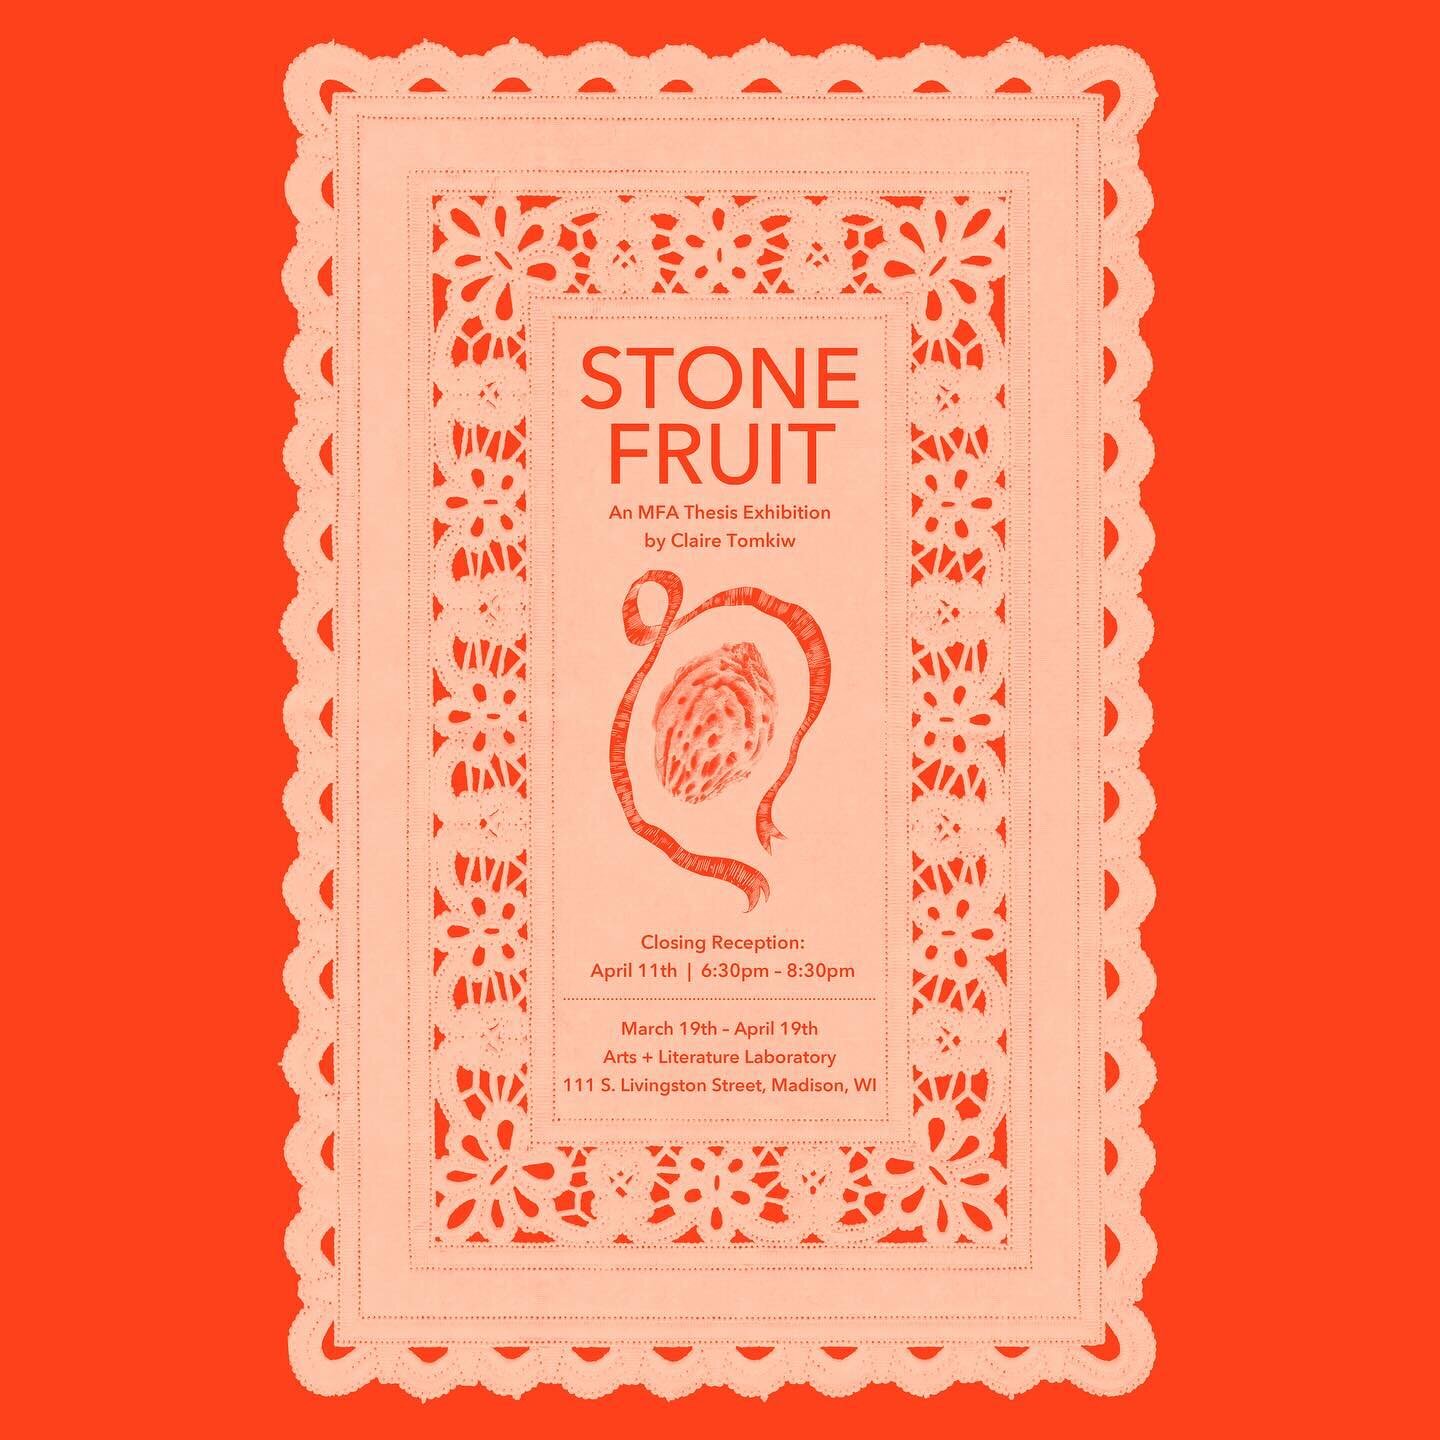 Truly so excited to say Stone Fruit, my graduate thesis exhibition, has a home at Arts + Literature Laboratory starting March 19th! She&rsquo;s a labor of love and dissection of my experience navigating chronic illness, specifically endometriosis.

C